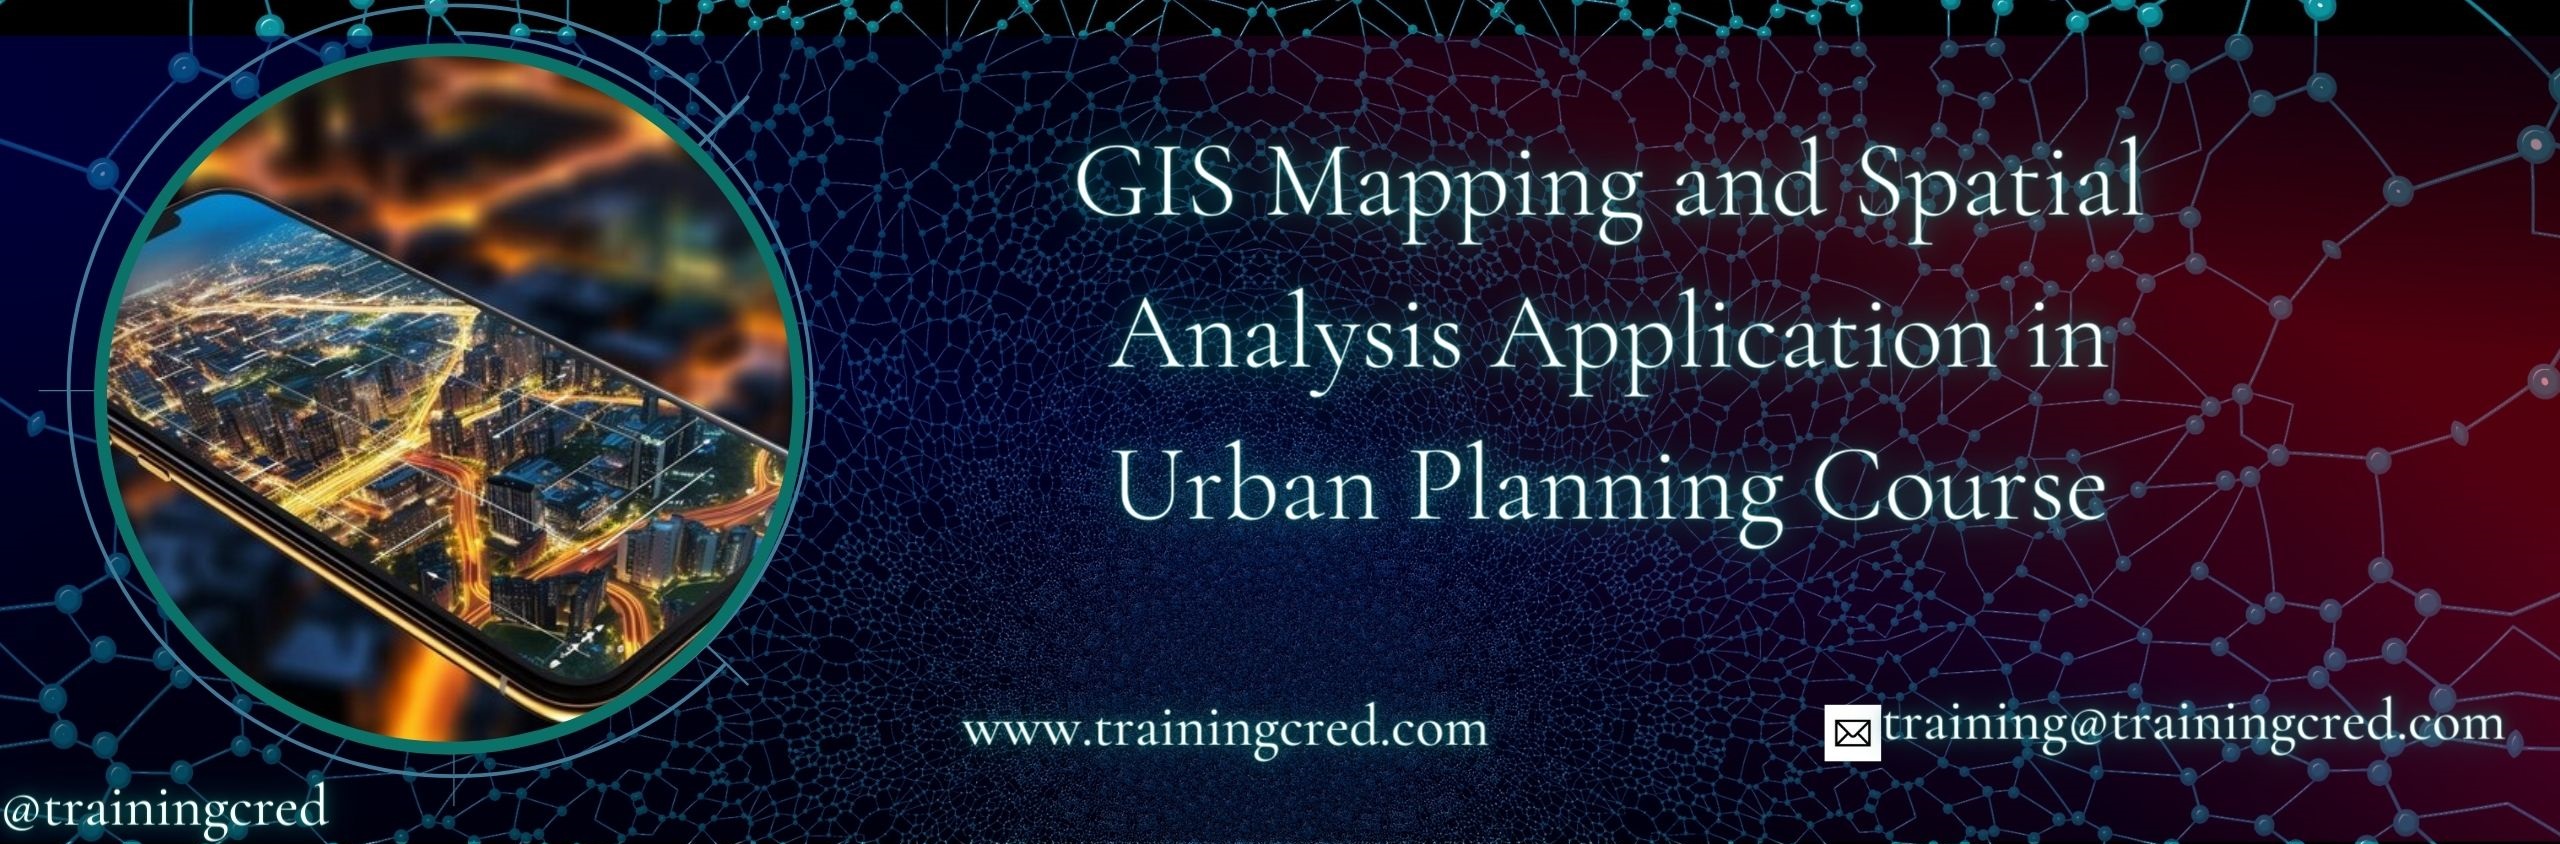 GIS Mapping and Spatial Analysis Application in Urban Planning